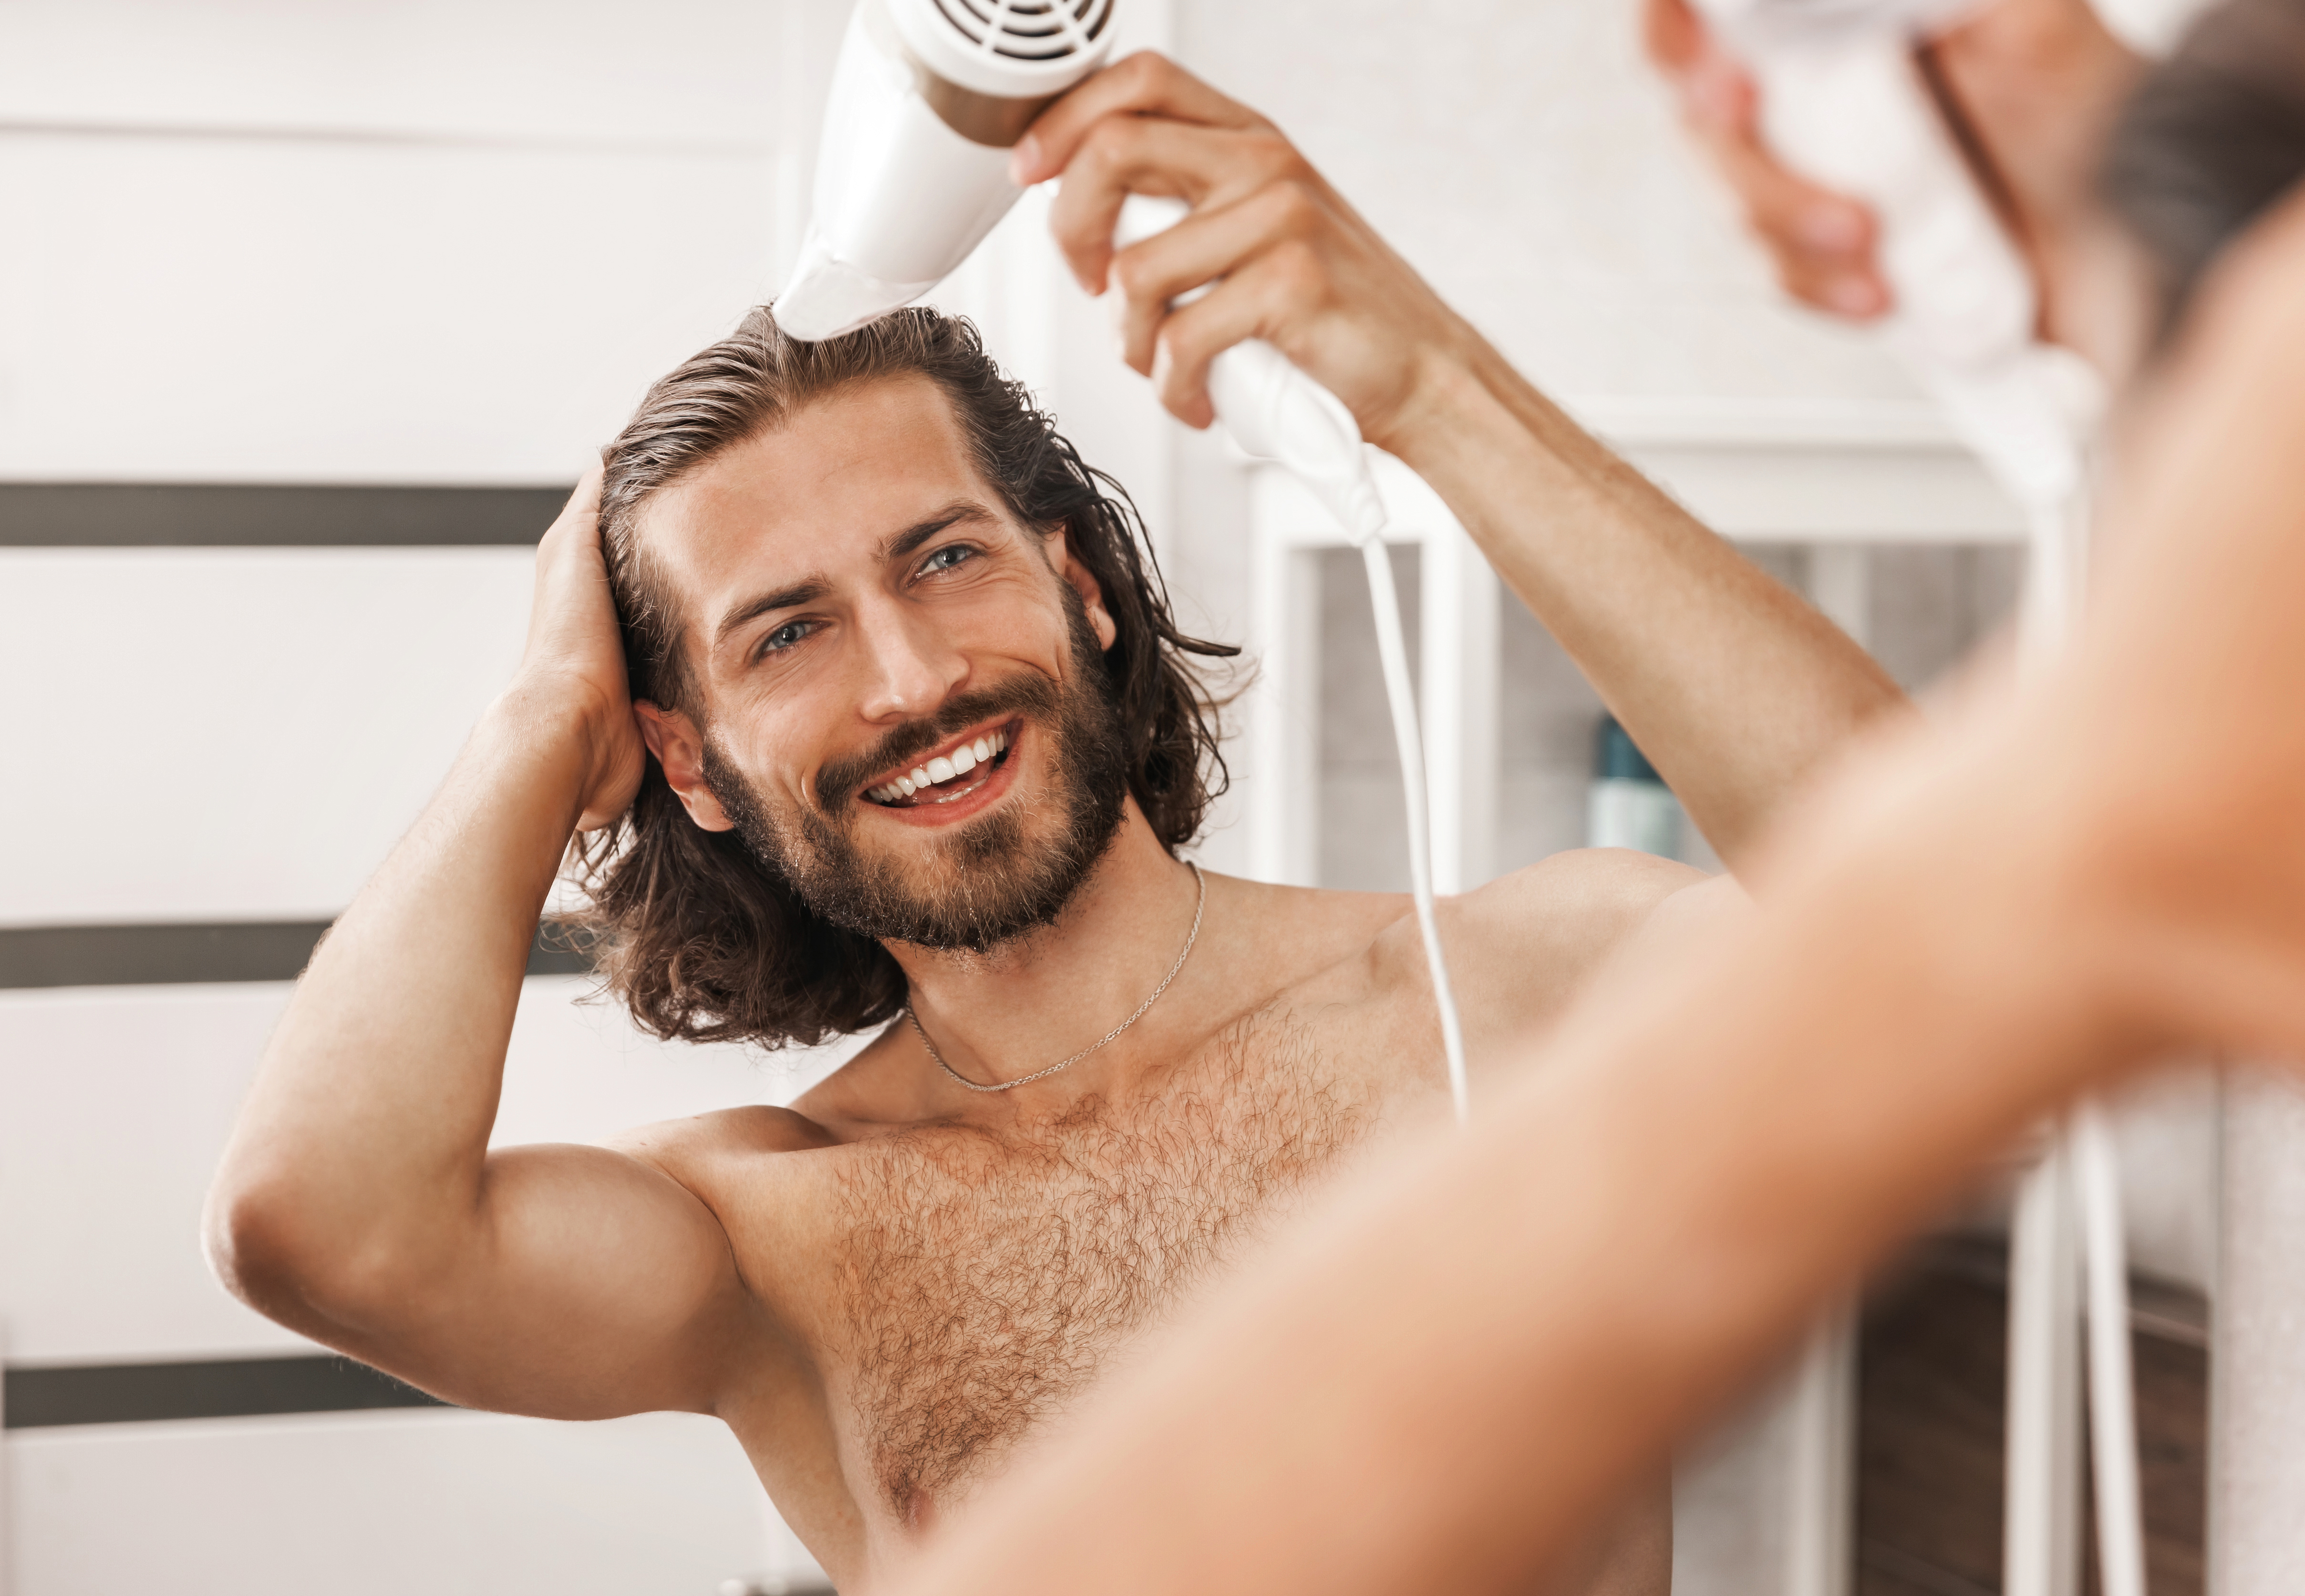 A man using a hairdryer in front of a mirror |Source: Shutterstock